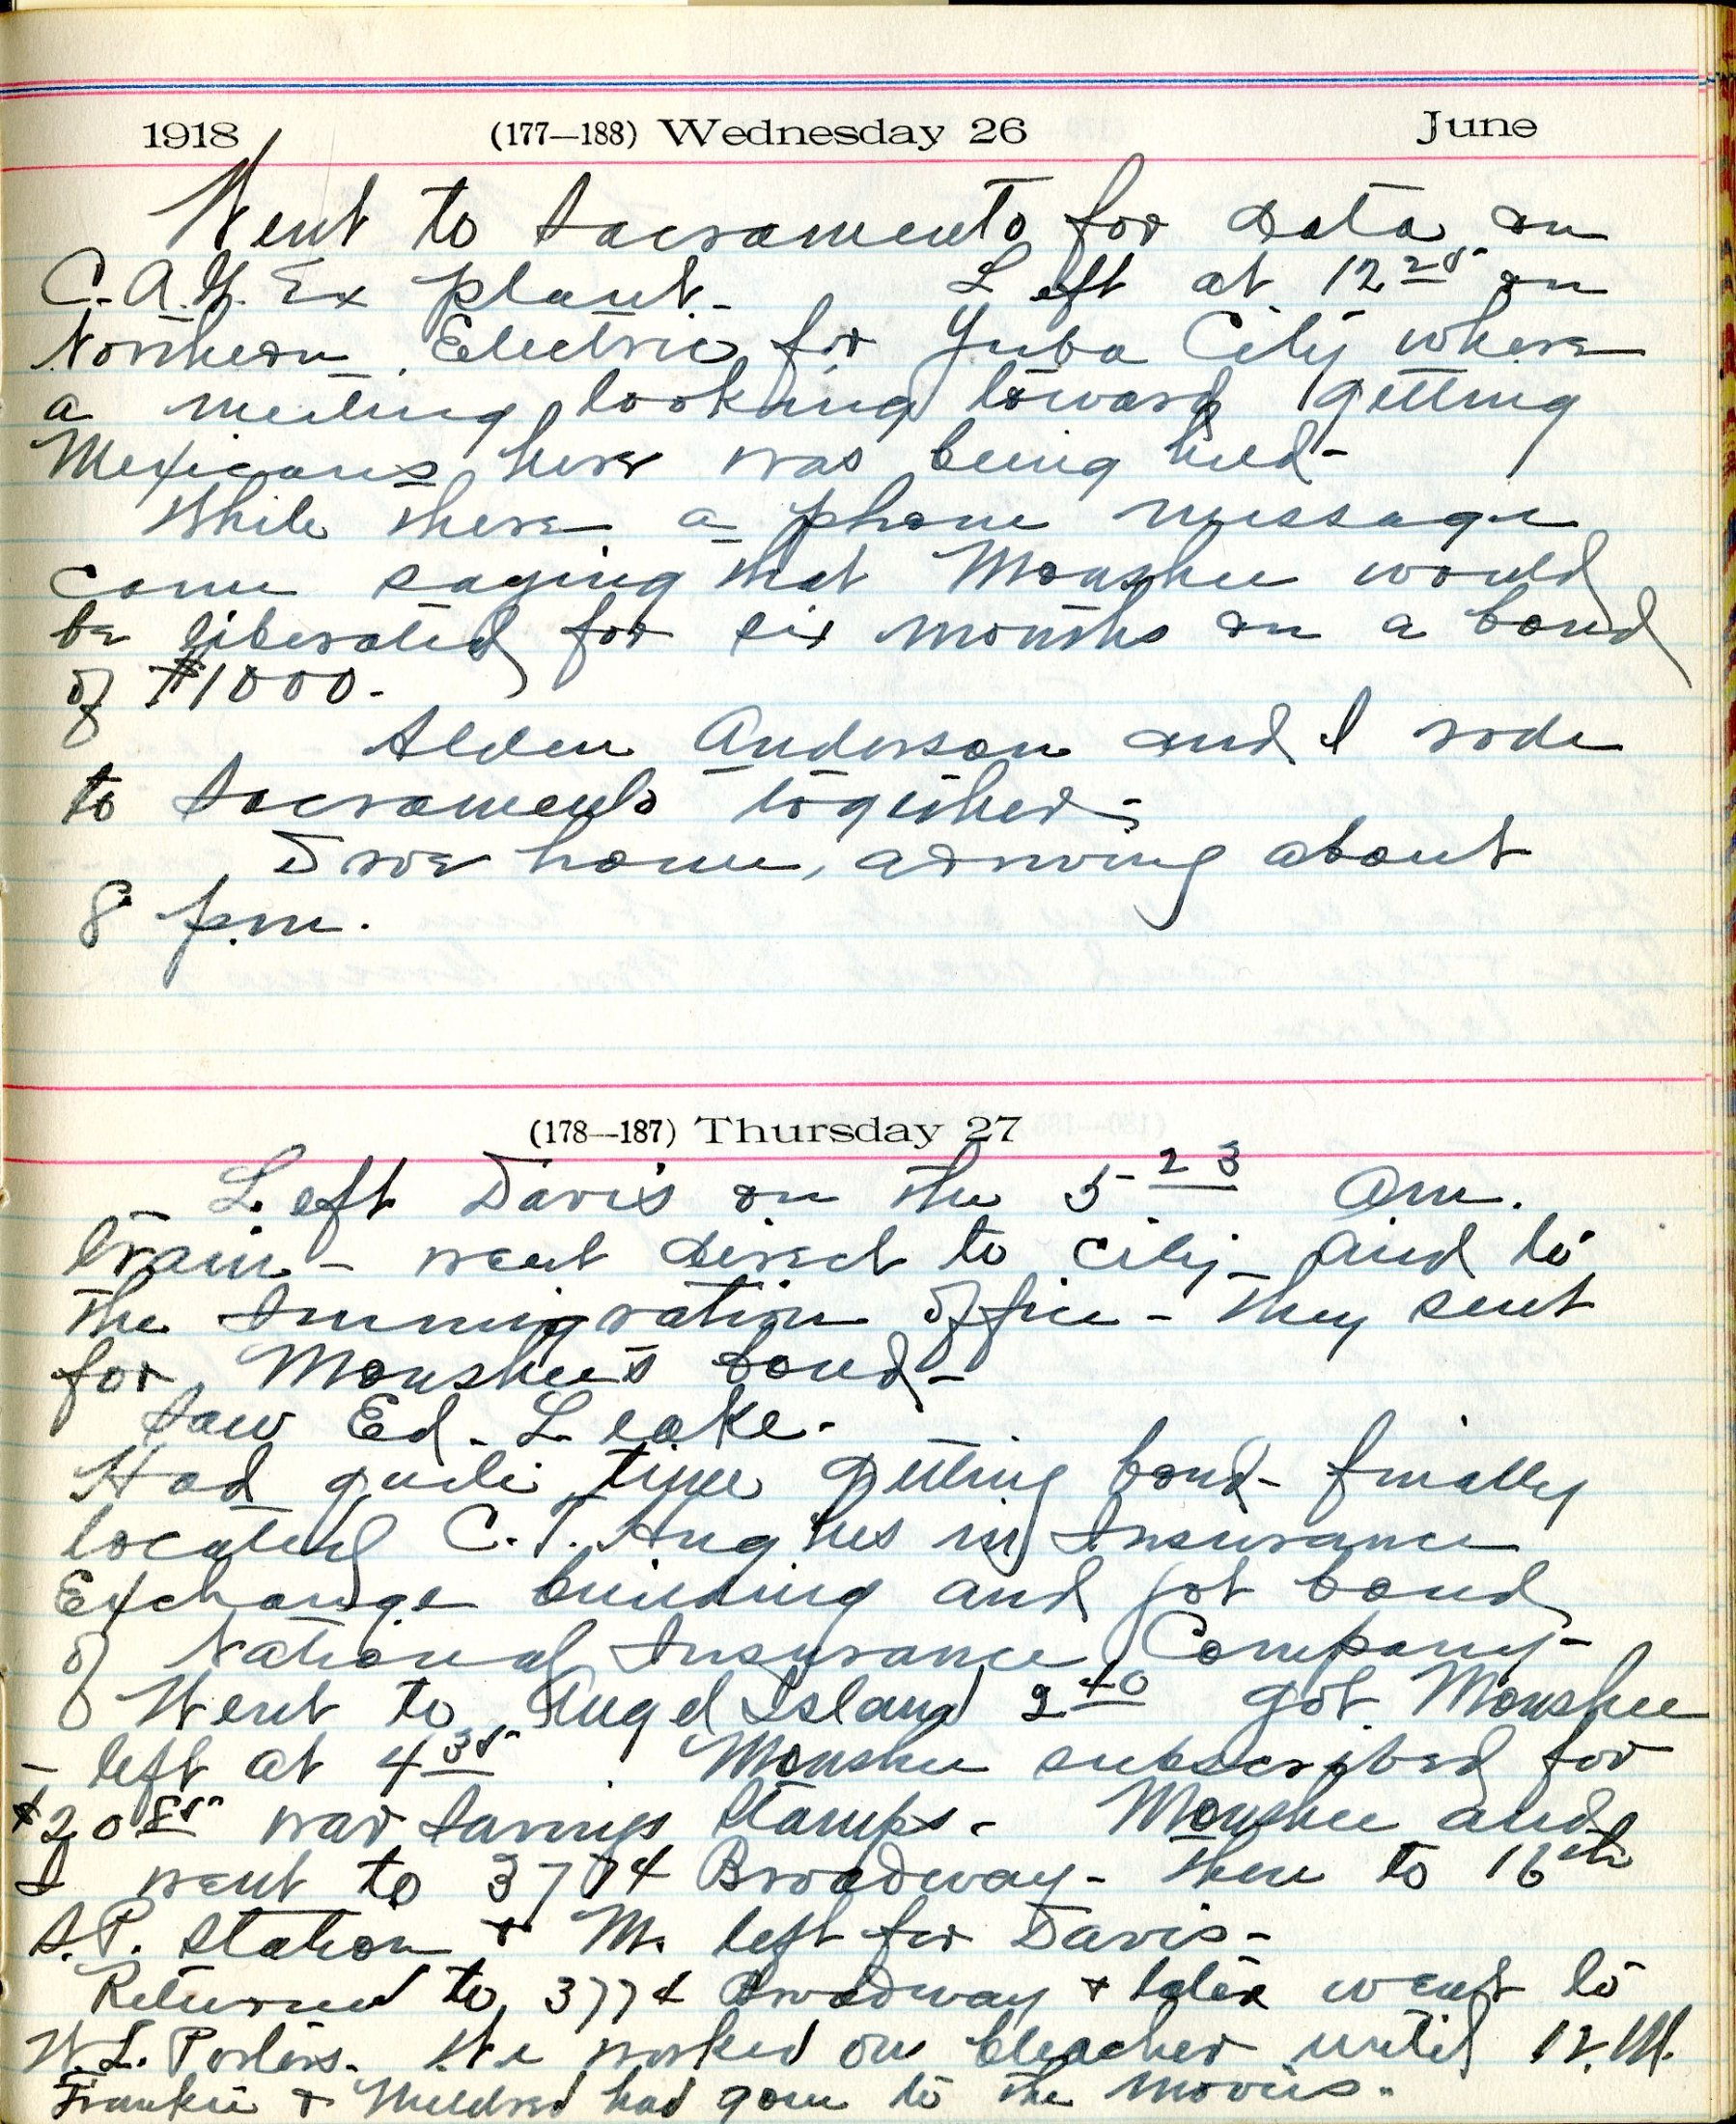 George Pierce Jr Documents His Tremendous Efforts to Secure Monshu Singh's Release From Angel Island, June 27, 1918. Pierce Family Papers, Special Collections, University of California, Davis Library.